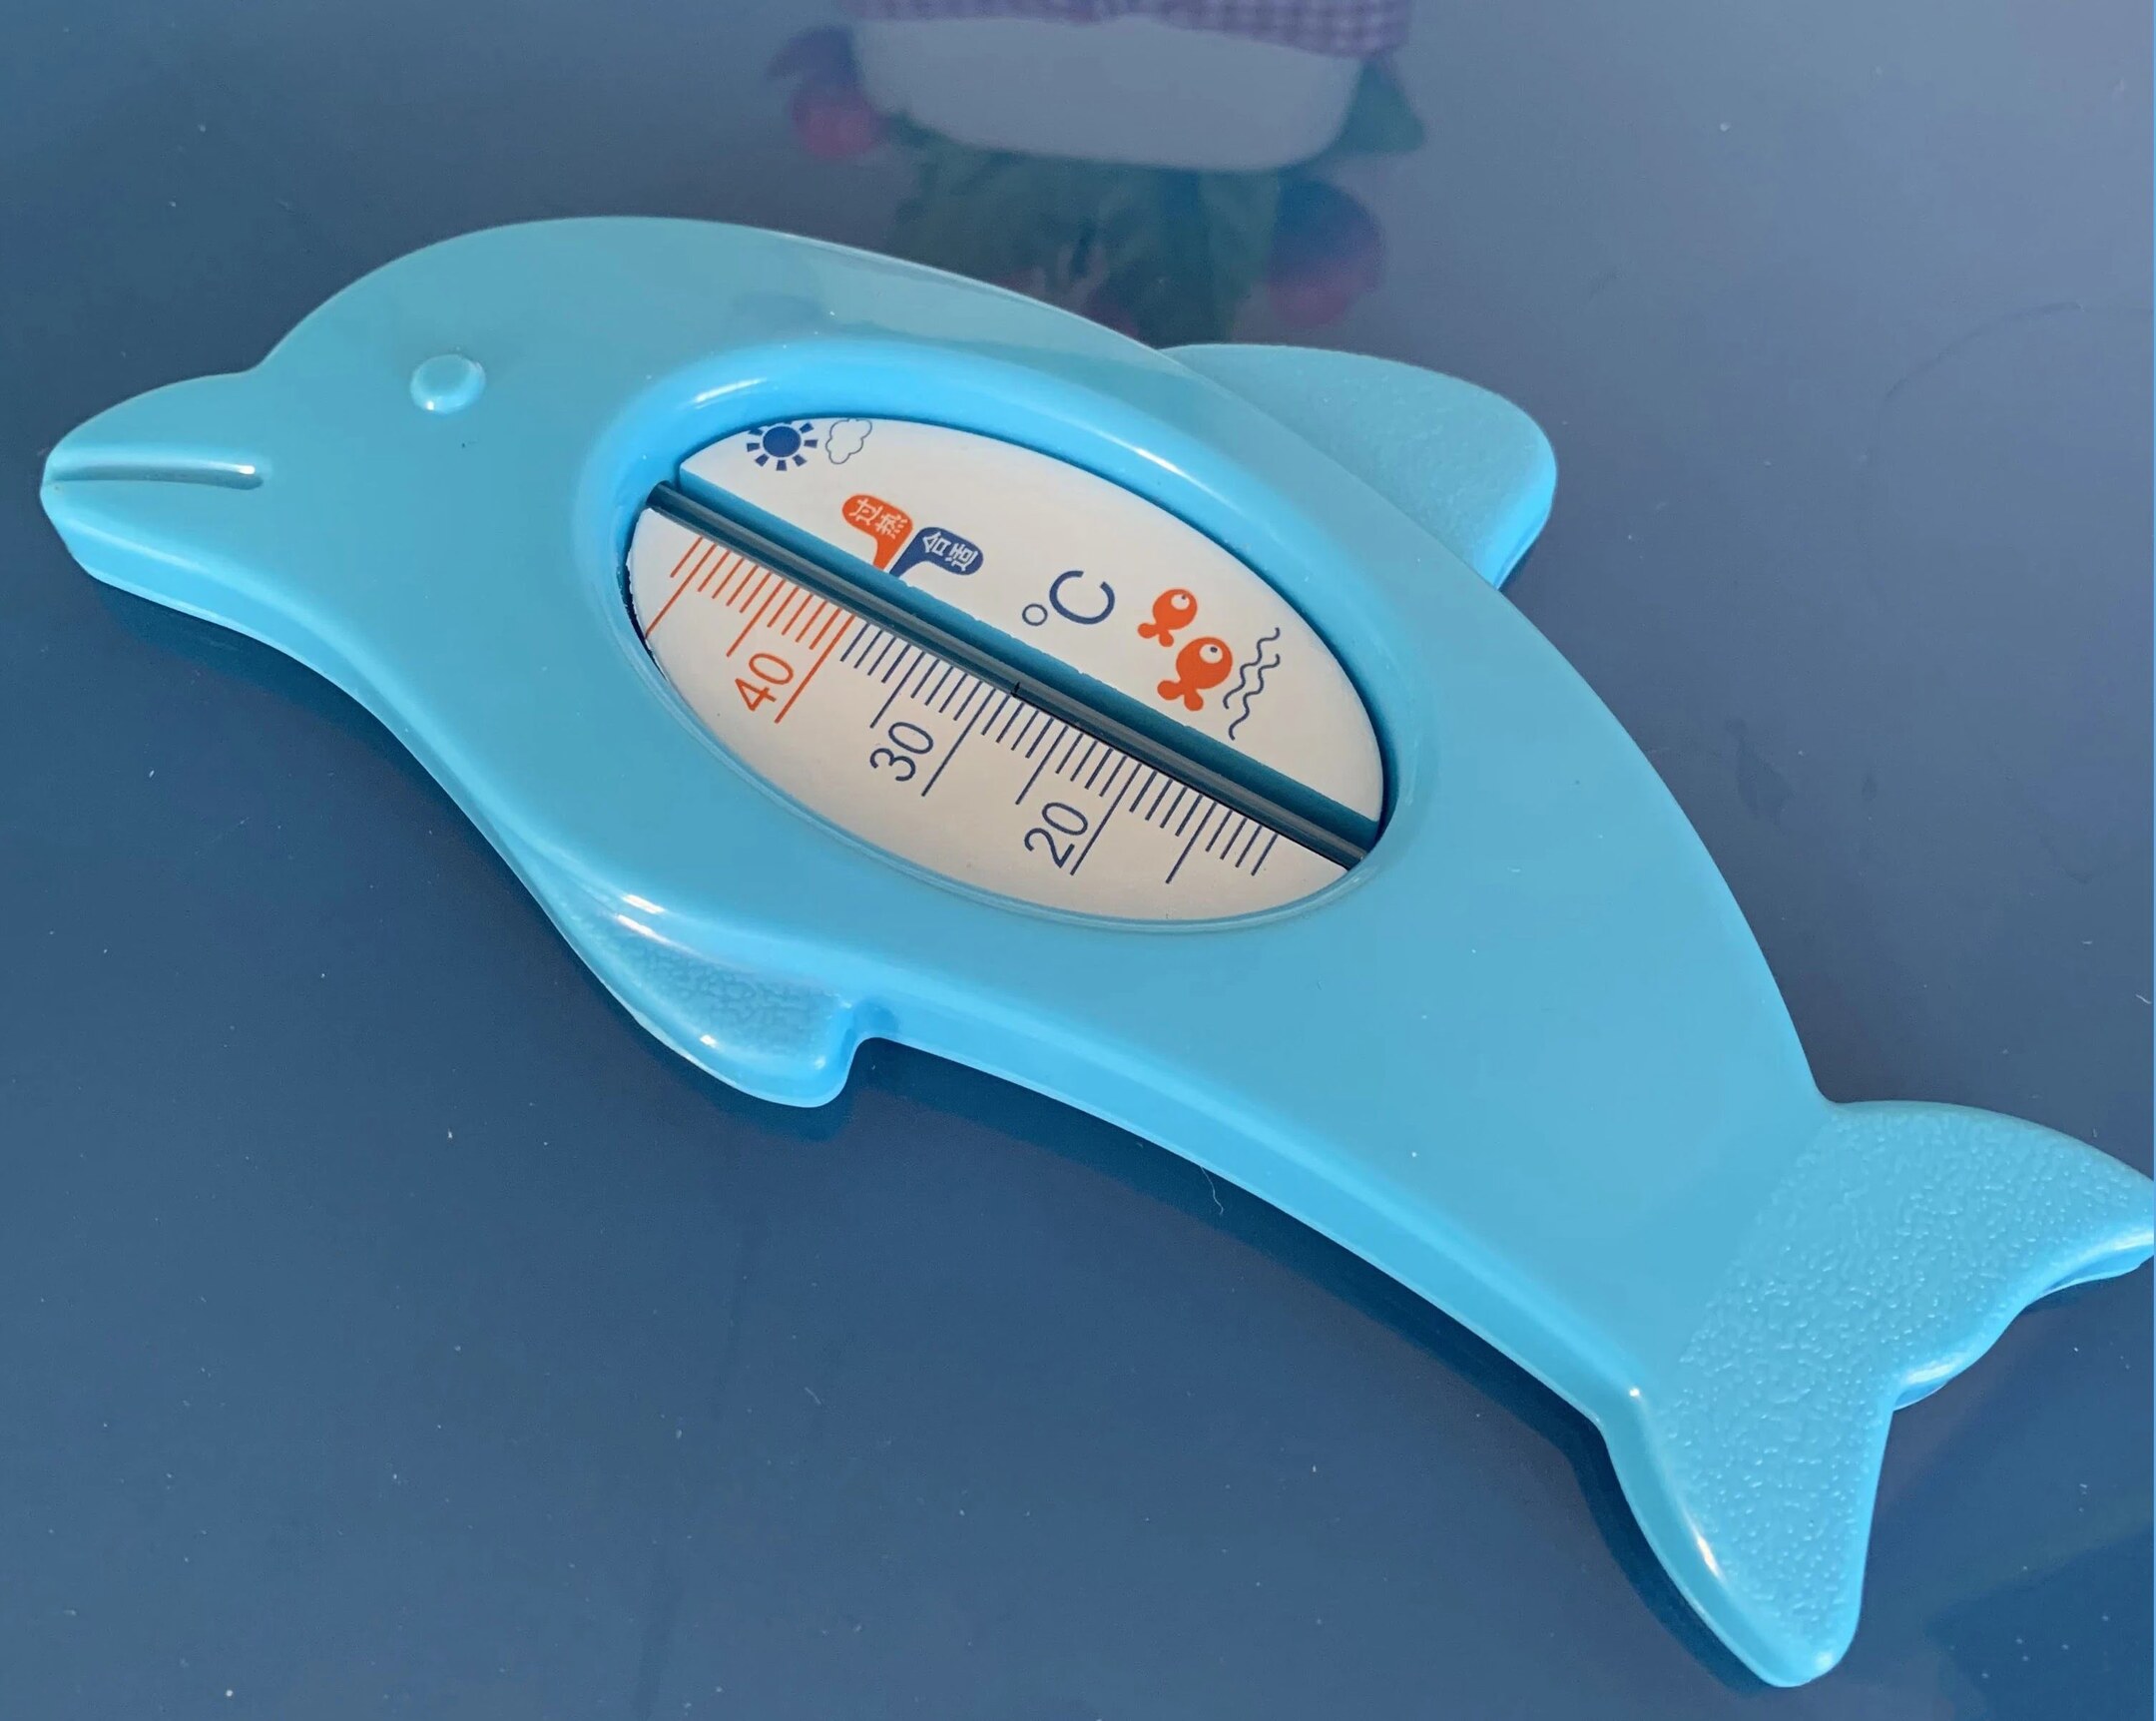 Bath Thermometer Review: Ensuring Safe and Comfortable Baths